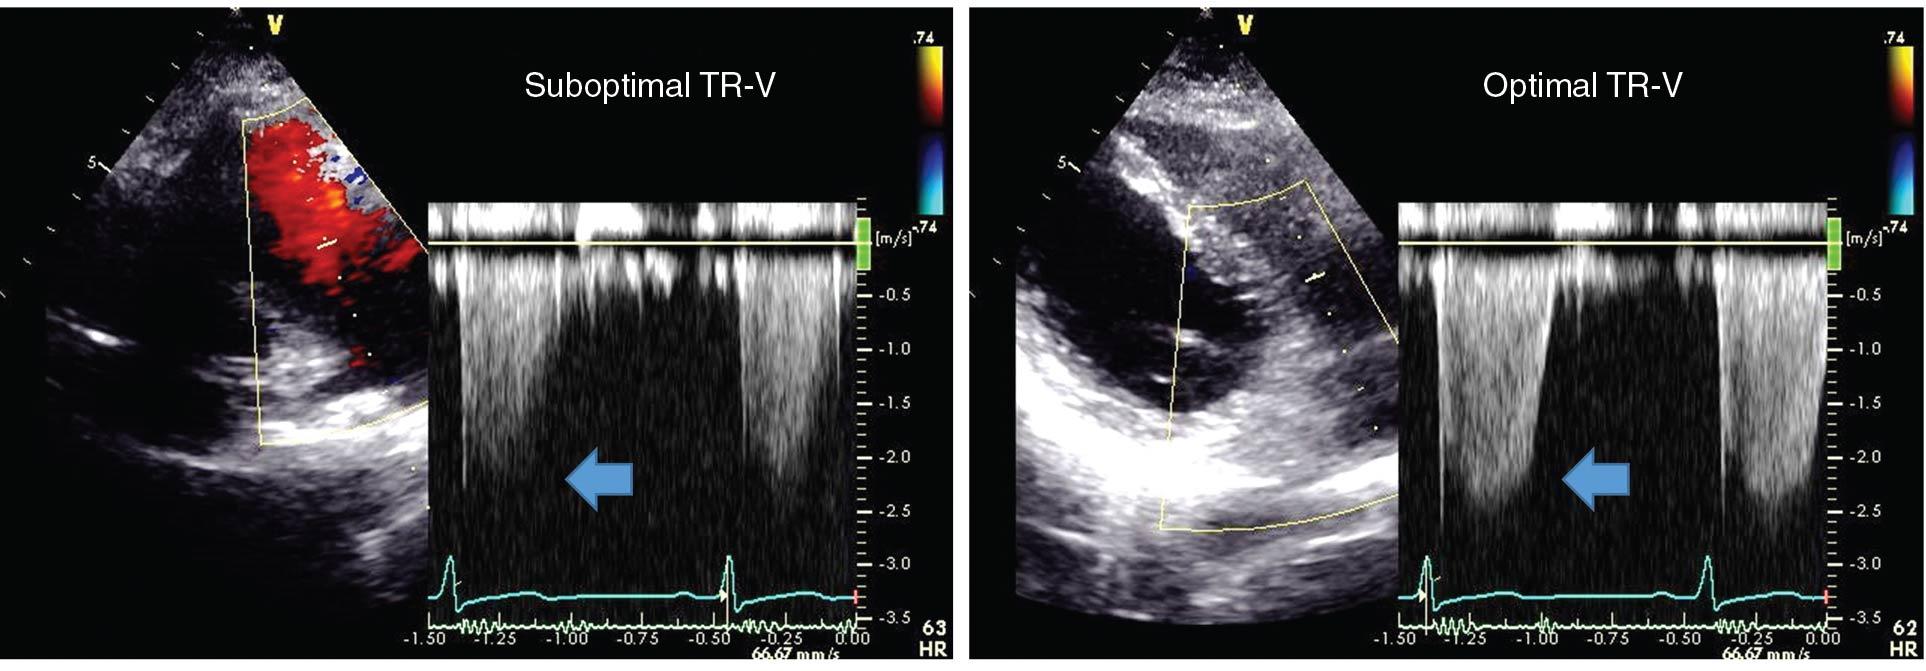 Fig. 6.4, Indeterminate assessment of diastolic function due to inadequate TR envelope. In contrast to the right panel, with a clear rounded edge of the spectral Doppler TR-V signal, the left panel shows a suboptimal TR-V due to an unclear edge.